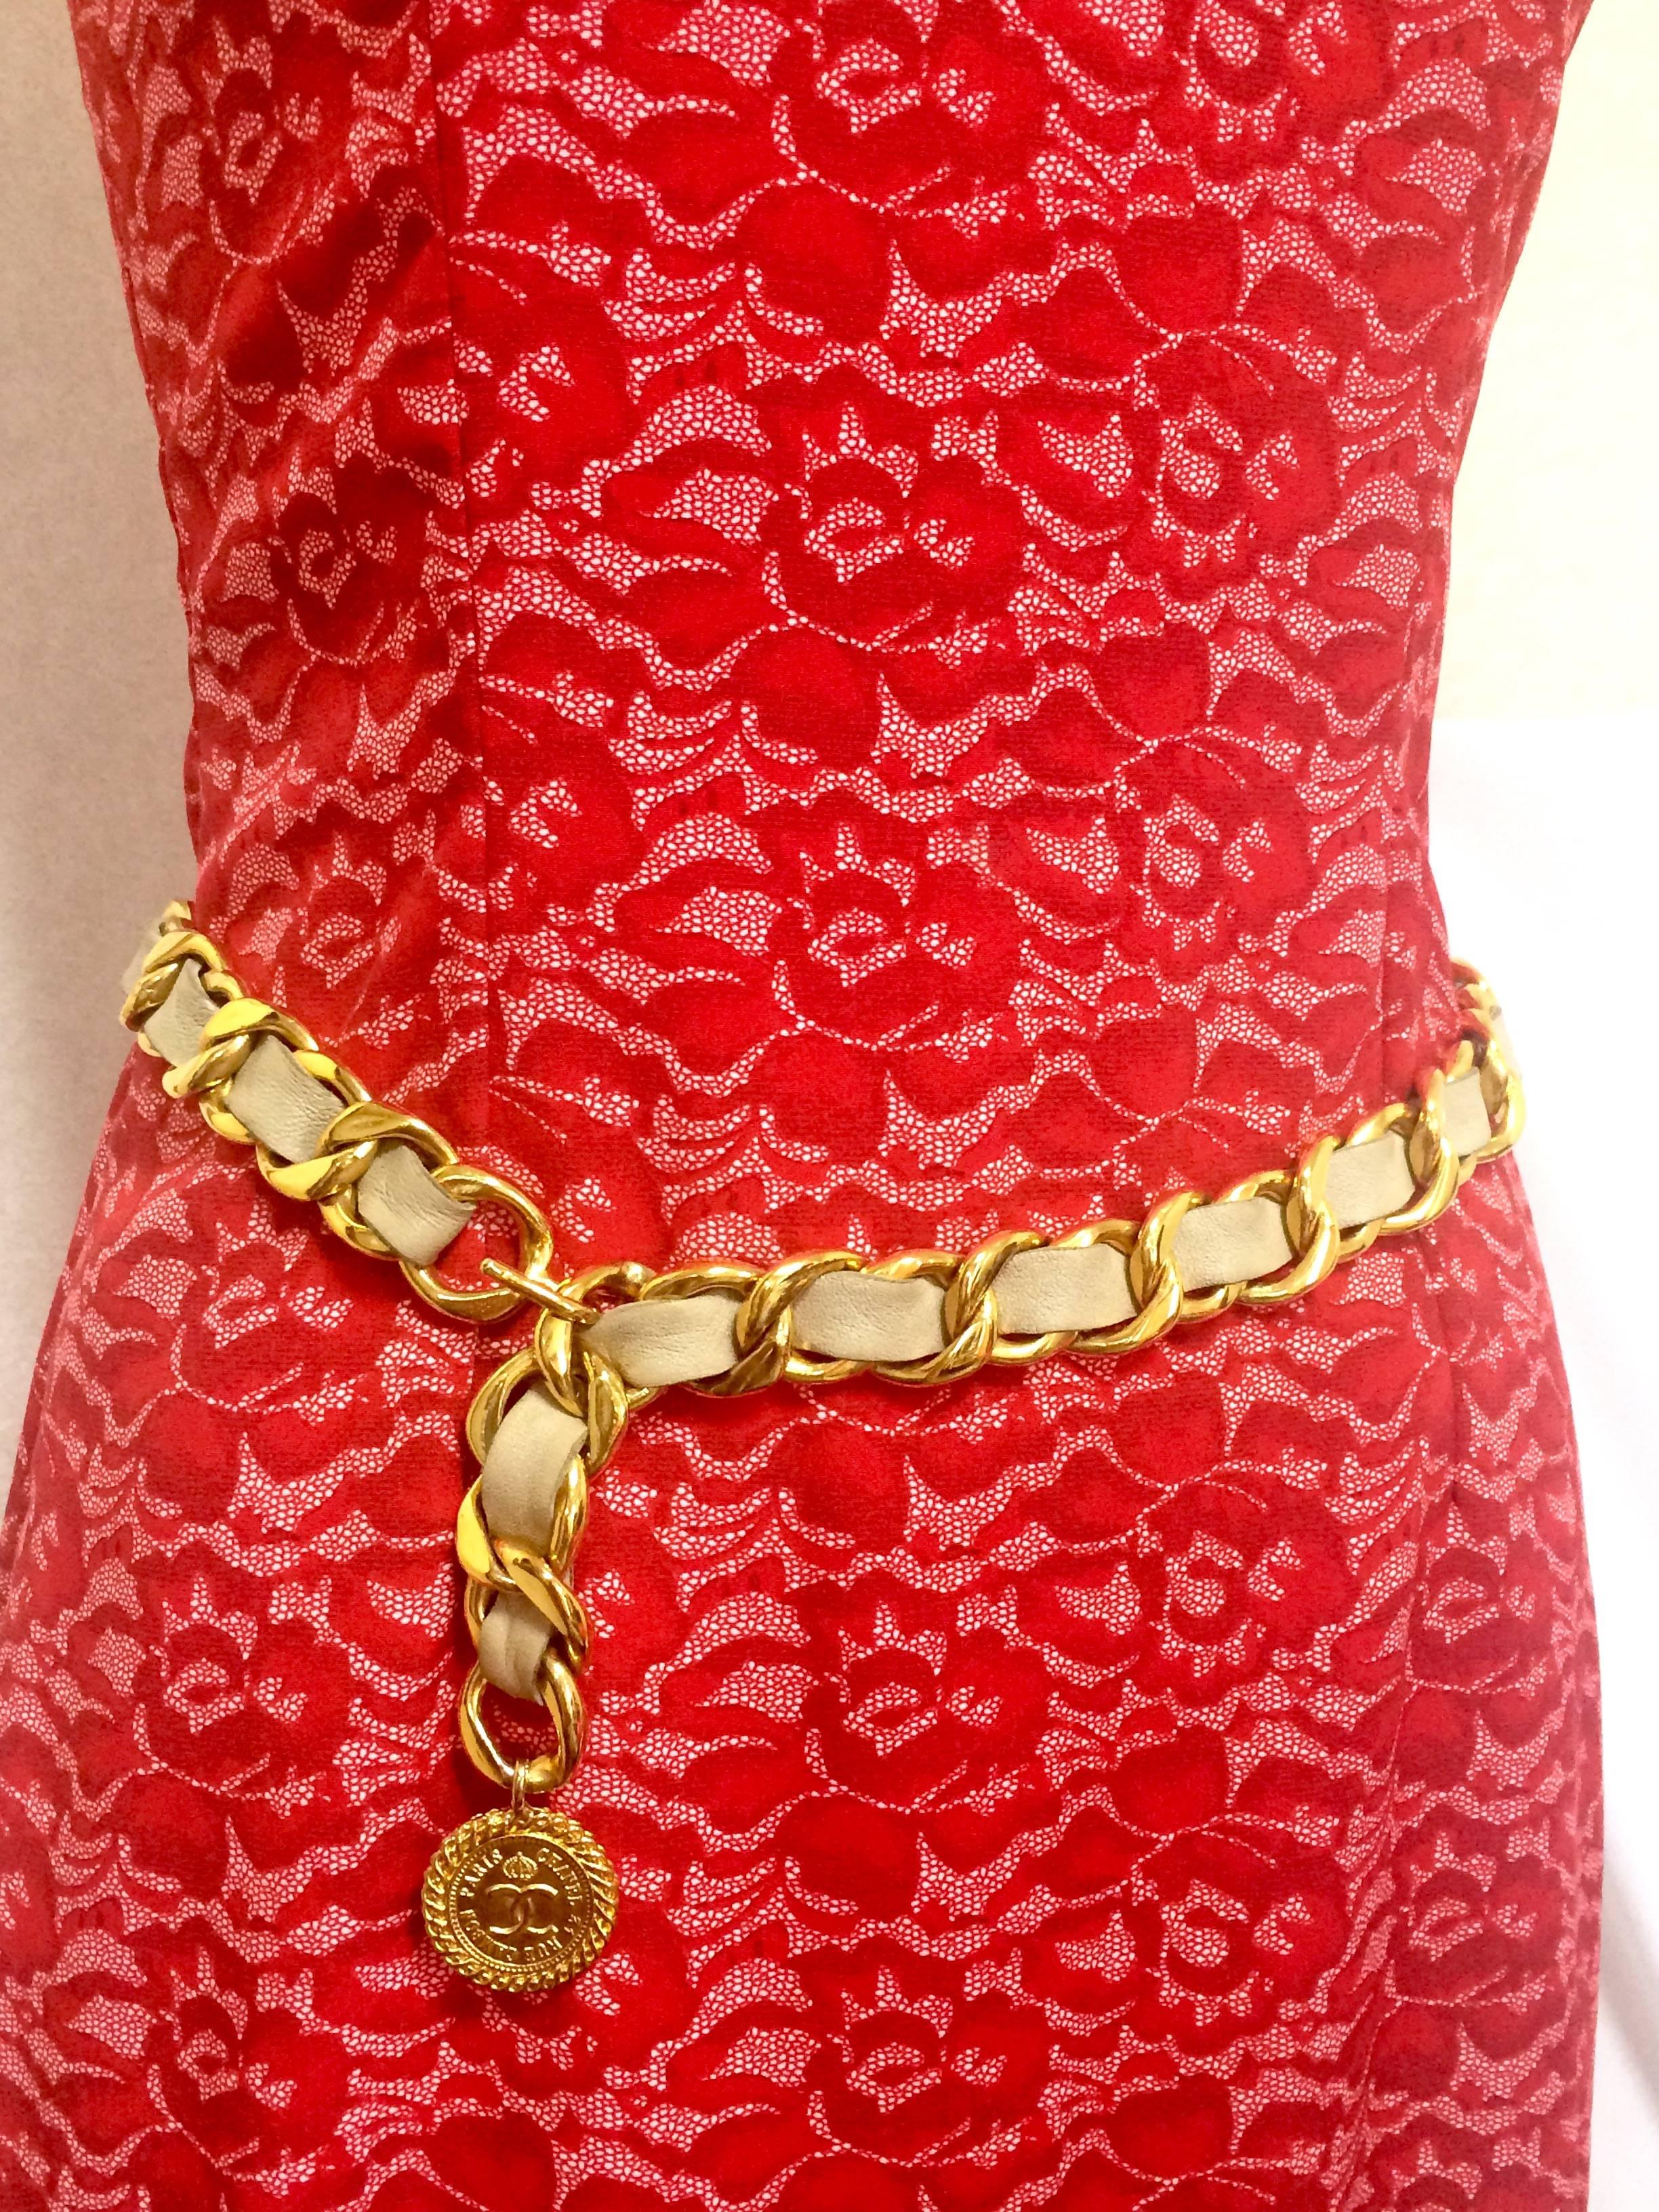 1980's Vintage CHANEL beige leather thick chain belt with golden CC and mademoiselle charm. Nice and heavy single layer chain belt from CHANEL.

***Double layer version is also for sale. Please see in shop.***

Introducing a nice and heavy beige